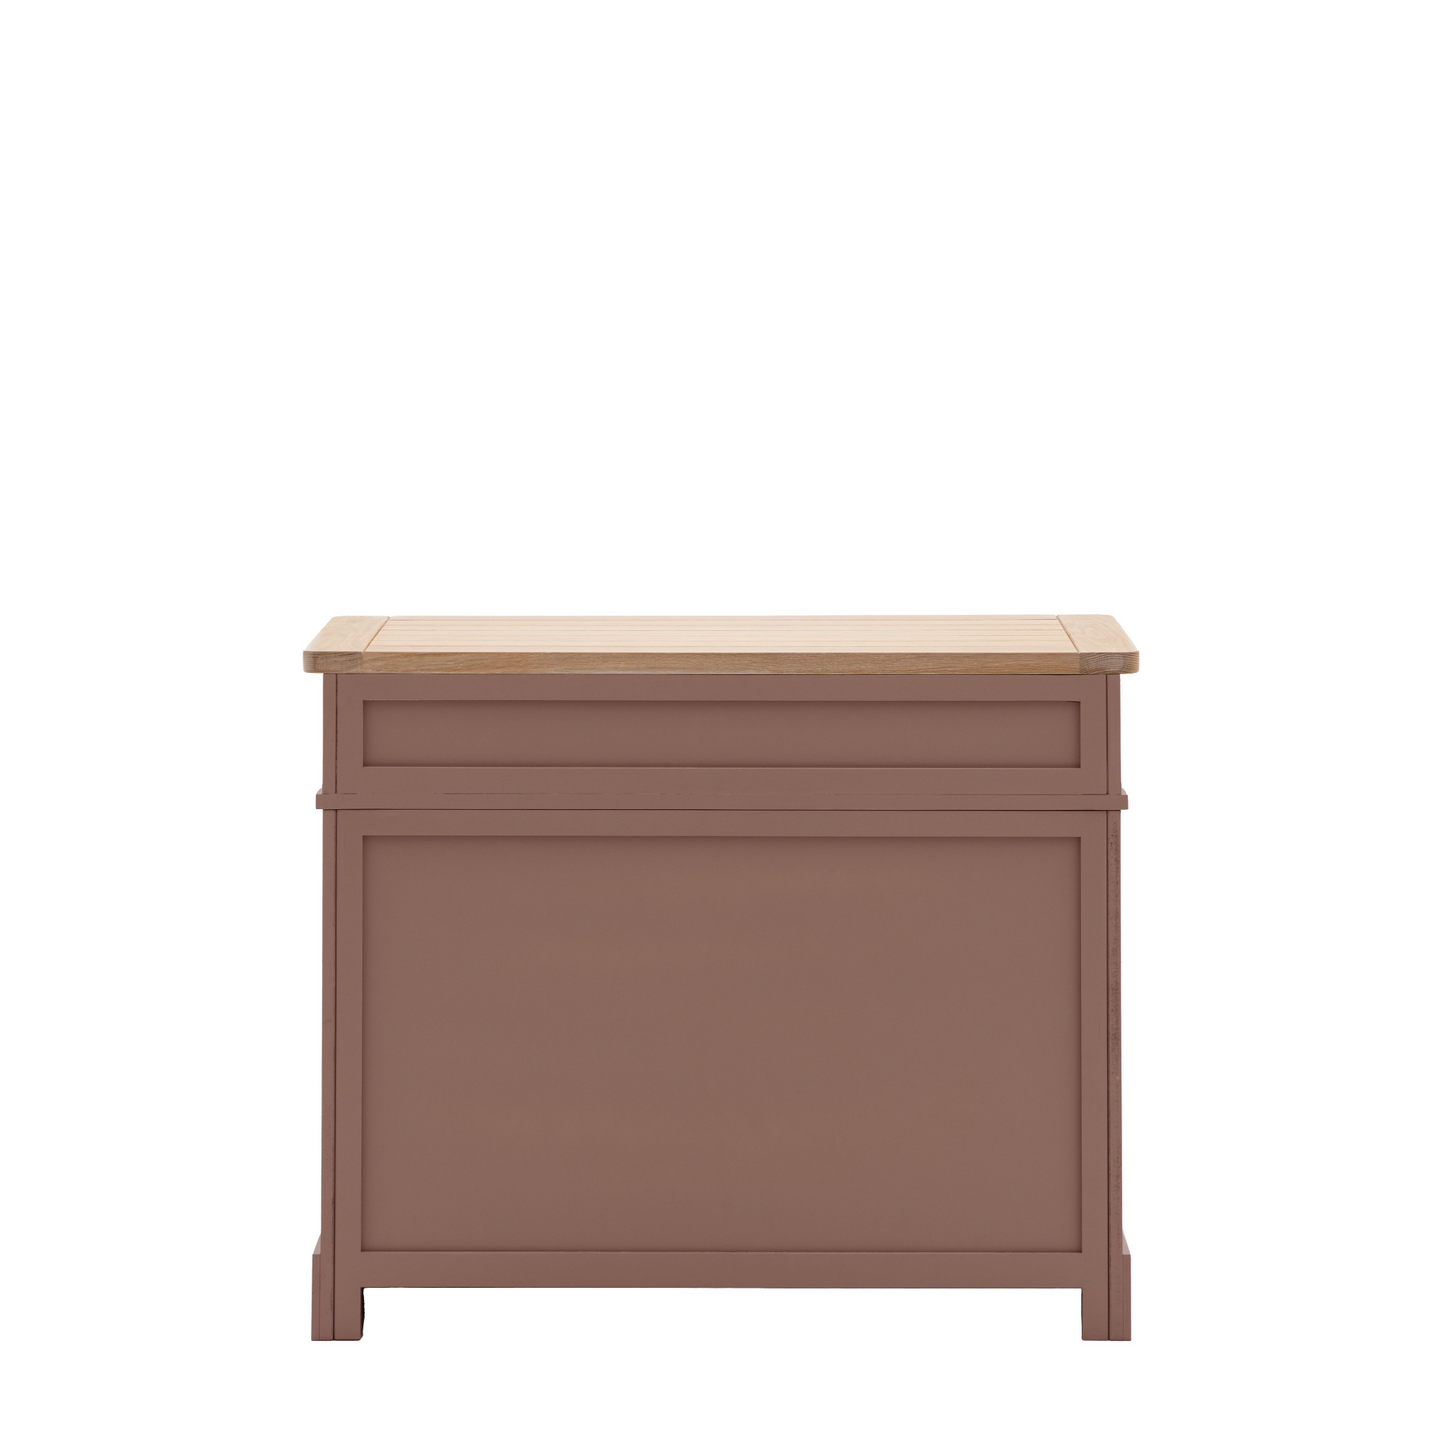 A Clay-colored Buckland 2 Door 1 Drawer Sideboard for home furniture and interior decor.